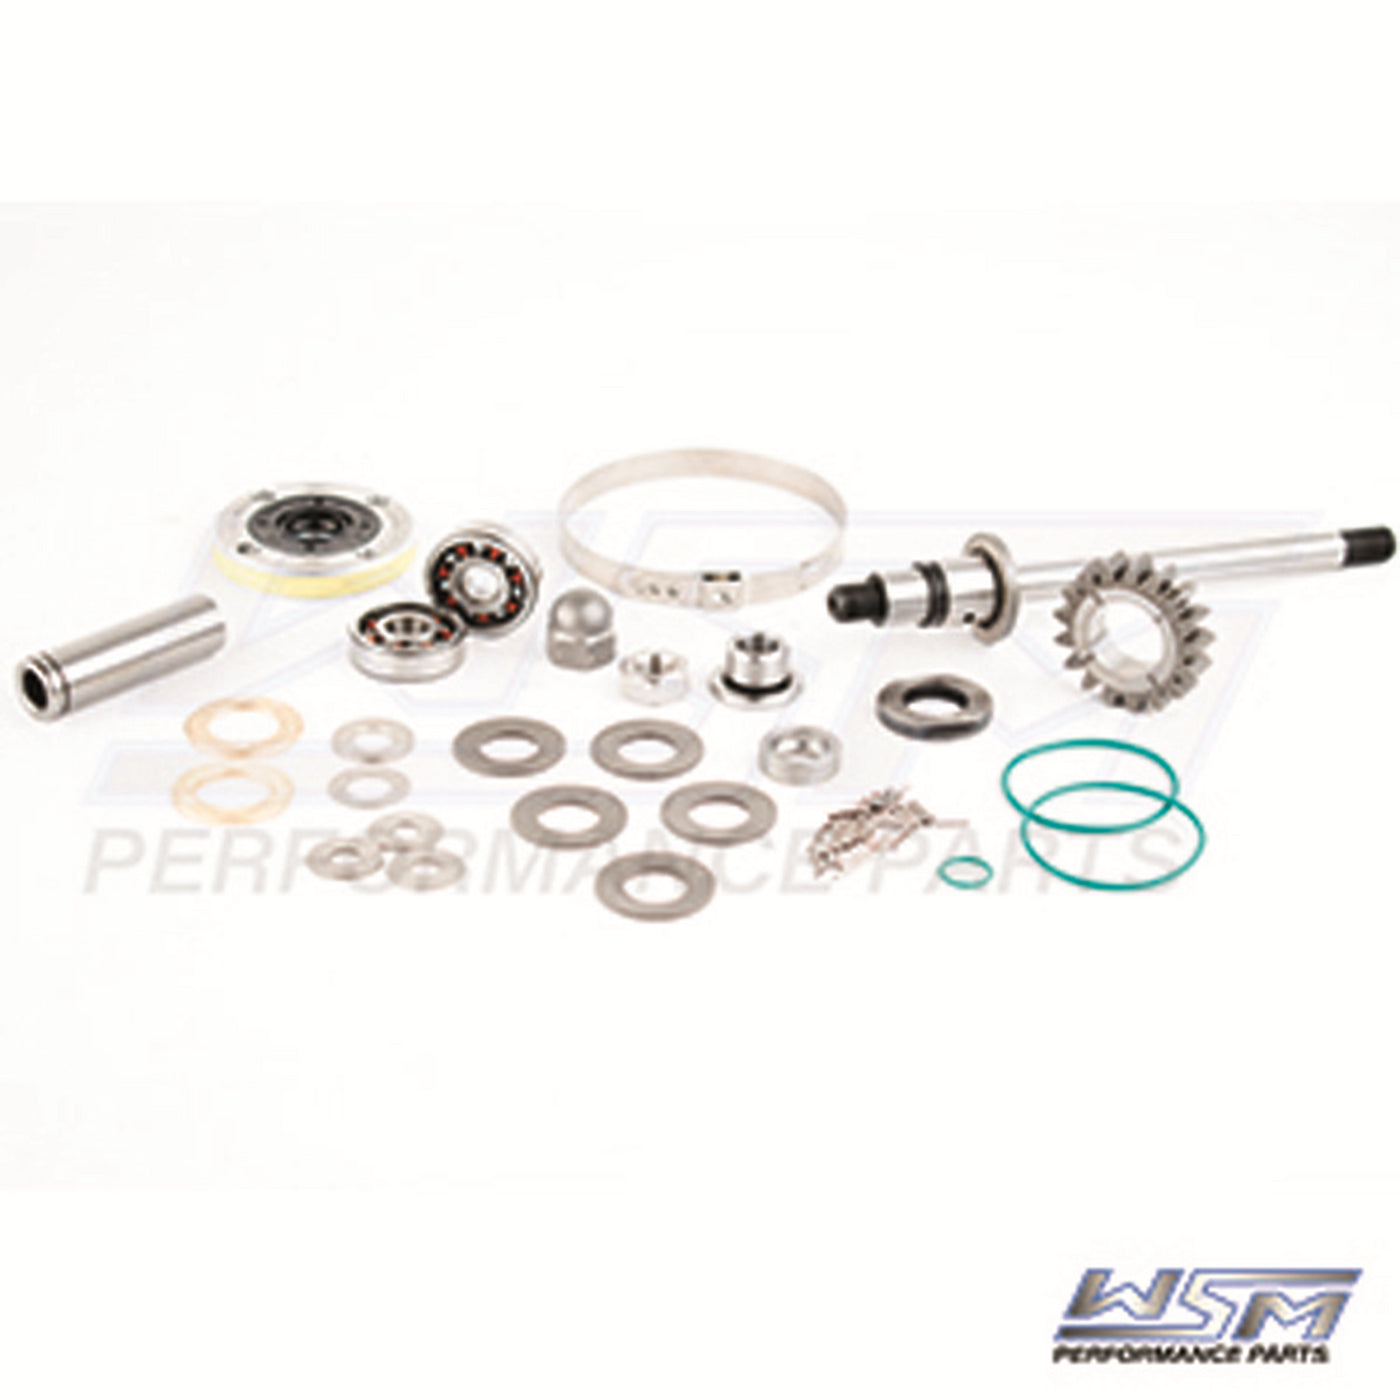 SUPER CHARGER KIT 17 TOOTH NONINTERCOOLED#mpn_010-103K